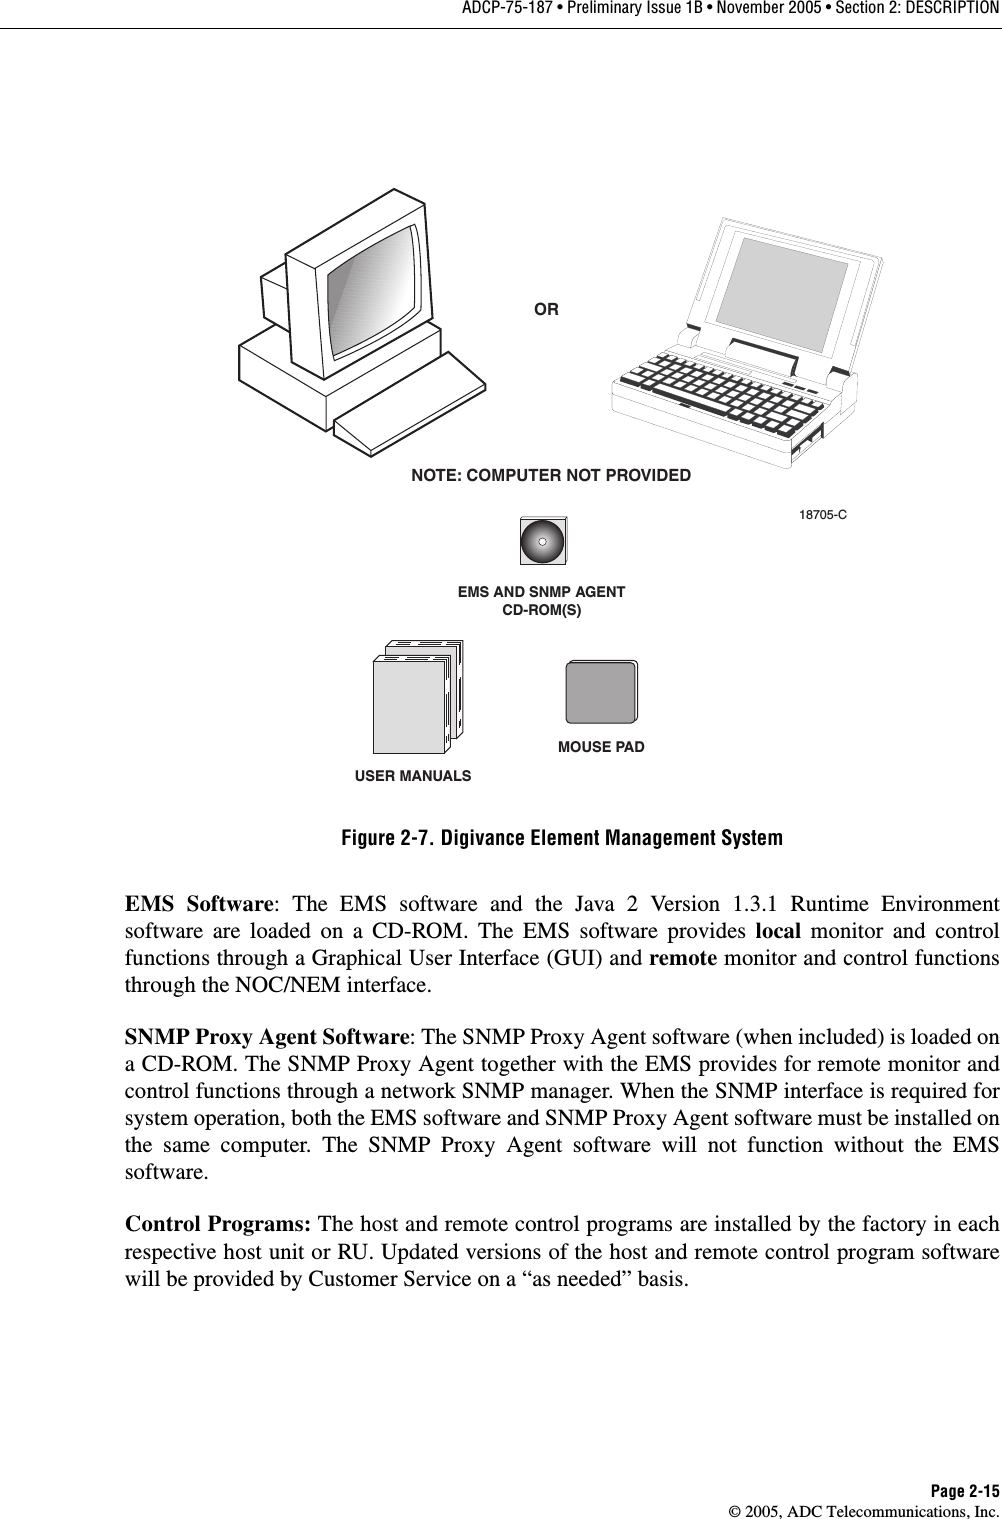 ADCP-75-187 • Preliminary Issue 1B • November 2005 • Section 2: DESCRIPTIONPage 2-15© 2005, ADC Telecommunications, Inc.Figure 2-7. Digivance Element Management SystemEMS Software: The EMS software and the Java 2 Version 1.3.1 Runtime Environmentsoftware are loaded on a CD-ROM. The EMS software provides local monitor and controlfunctions through a Graphical User Interface (GUI) and remote monitor and control functionsthrough the NOC/NEM interface. SNMP Proxy Agent Software: The SNMP Proxy Agent software (when included) is loaded ona CD-ROM. The SNMP Proxy Agent together with the EMS provides for remote monitor andcontrol functions through a network SNMP manager. When the SNMP interface is required forsystem operation, both the EMS software and SNMP Proxy Agent software must be installed onthe same computer. The SNMP Proxy Agent software will not function without the EMSsoftware. Control Programs: The host and remote control programs are installed by the factory in eachrespective host unit or RU. Updated versions of the host and remote control program softwarewill be provided by Customer Service on a “as needed” basis. EMS AND SNMP AGENTCD-ROM(S)ORNOTE: COMPUTER NOT PROVIDED18705-CUSER MANUALSMOUSE PAD